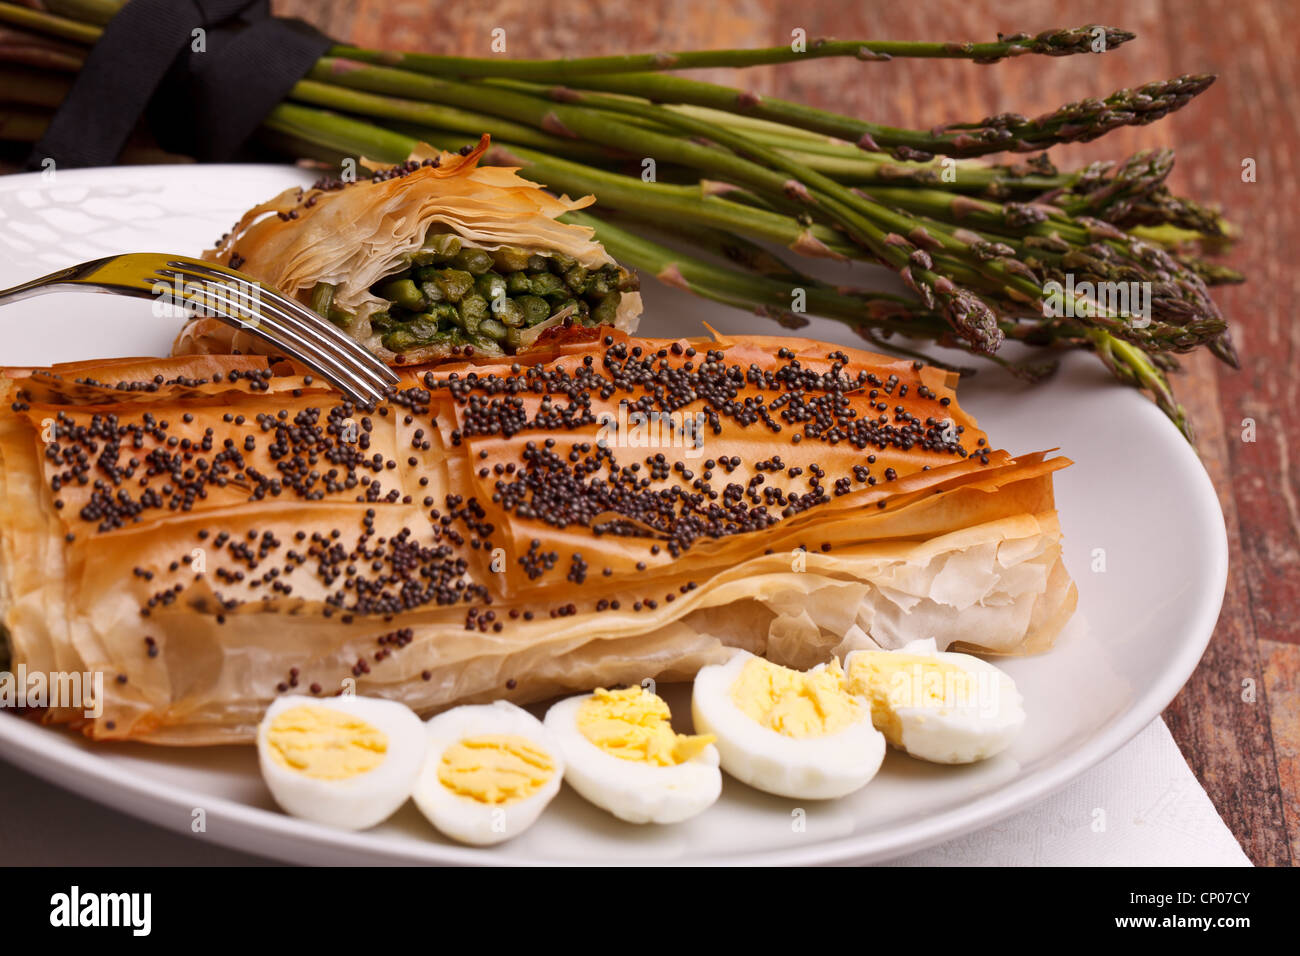 Asparagus In Crust With Poppy Seeds And Quail Eggs Stock Photo